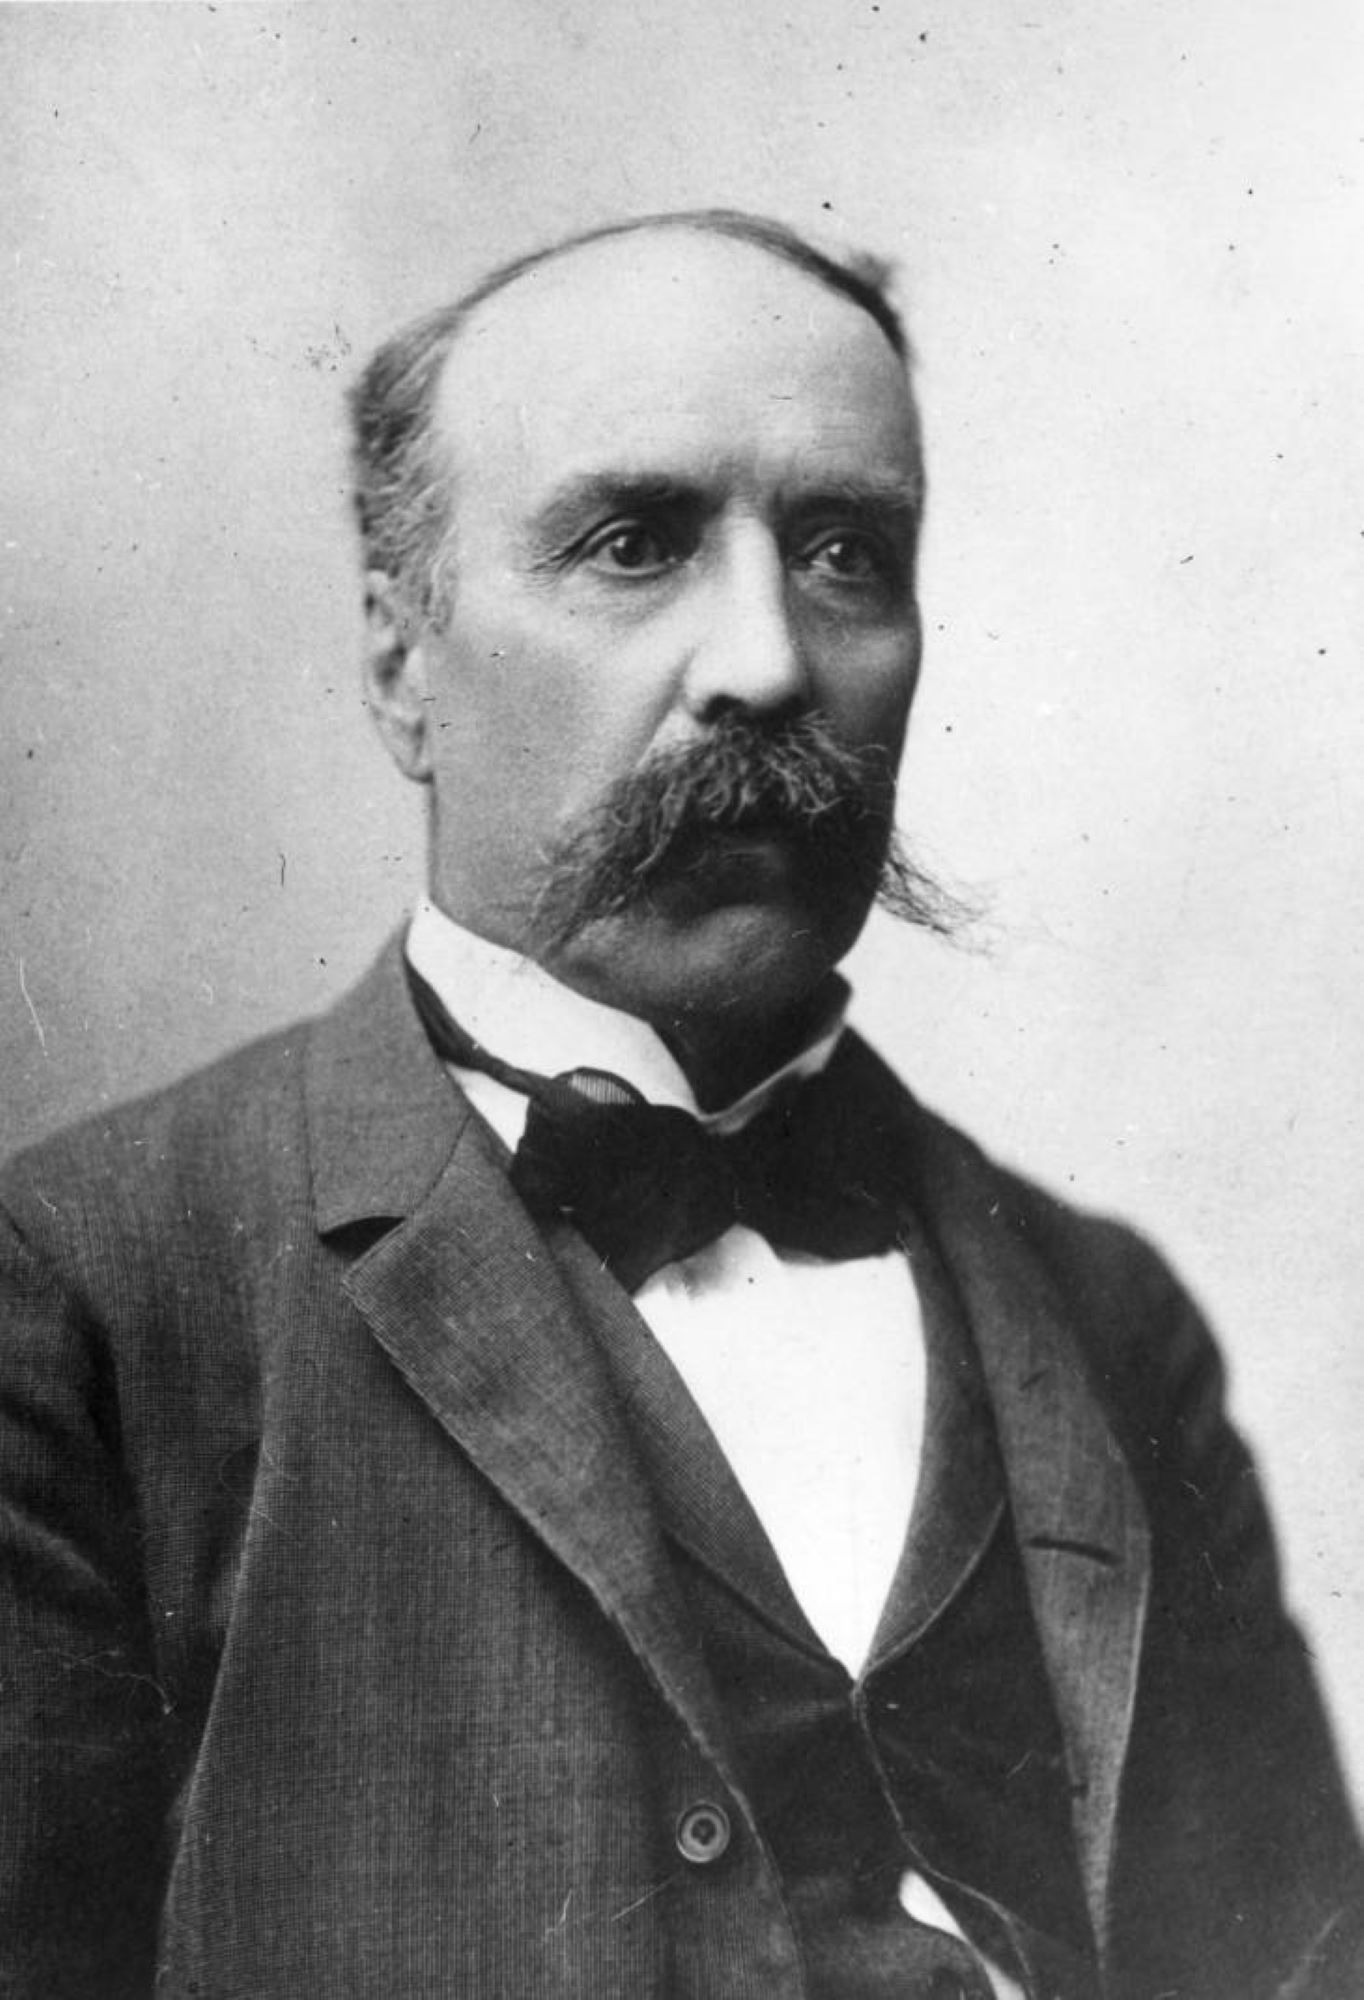 Photo of a middle-aged gentleman posing for a portrait. He is wearing a dark suit jacket and waistcoat over a white dress shirt with a black bowtie. He is balding, and his hair is short. He does have a very bushy handlebar-style moustache. He is not smiling, but rather looks straight ahead, off to the right of the image. The background of the photo is plain white.